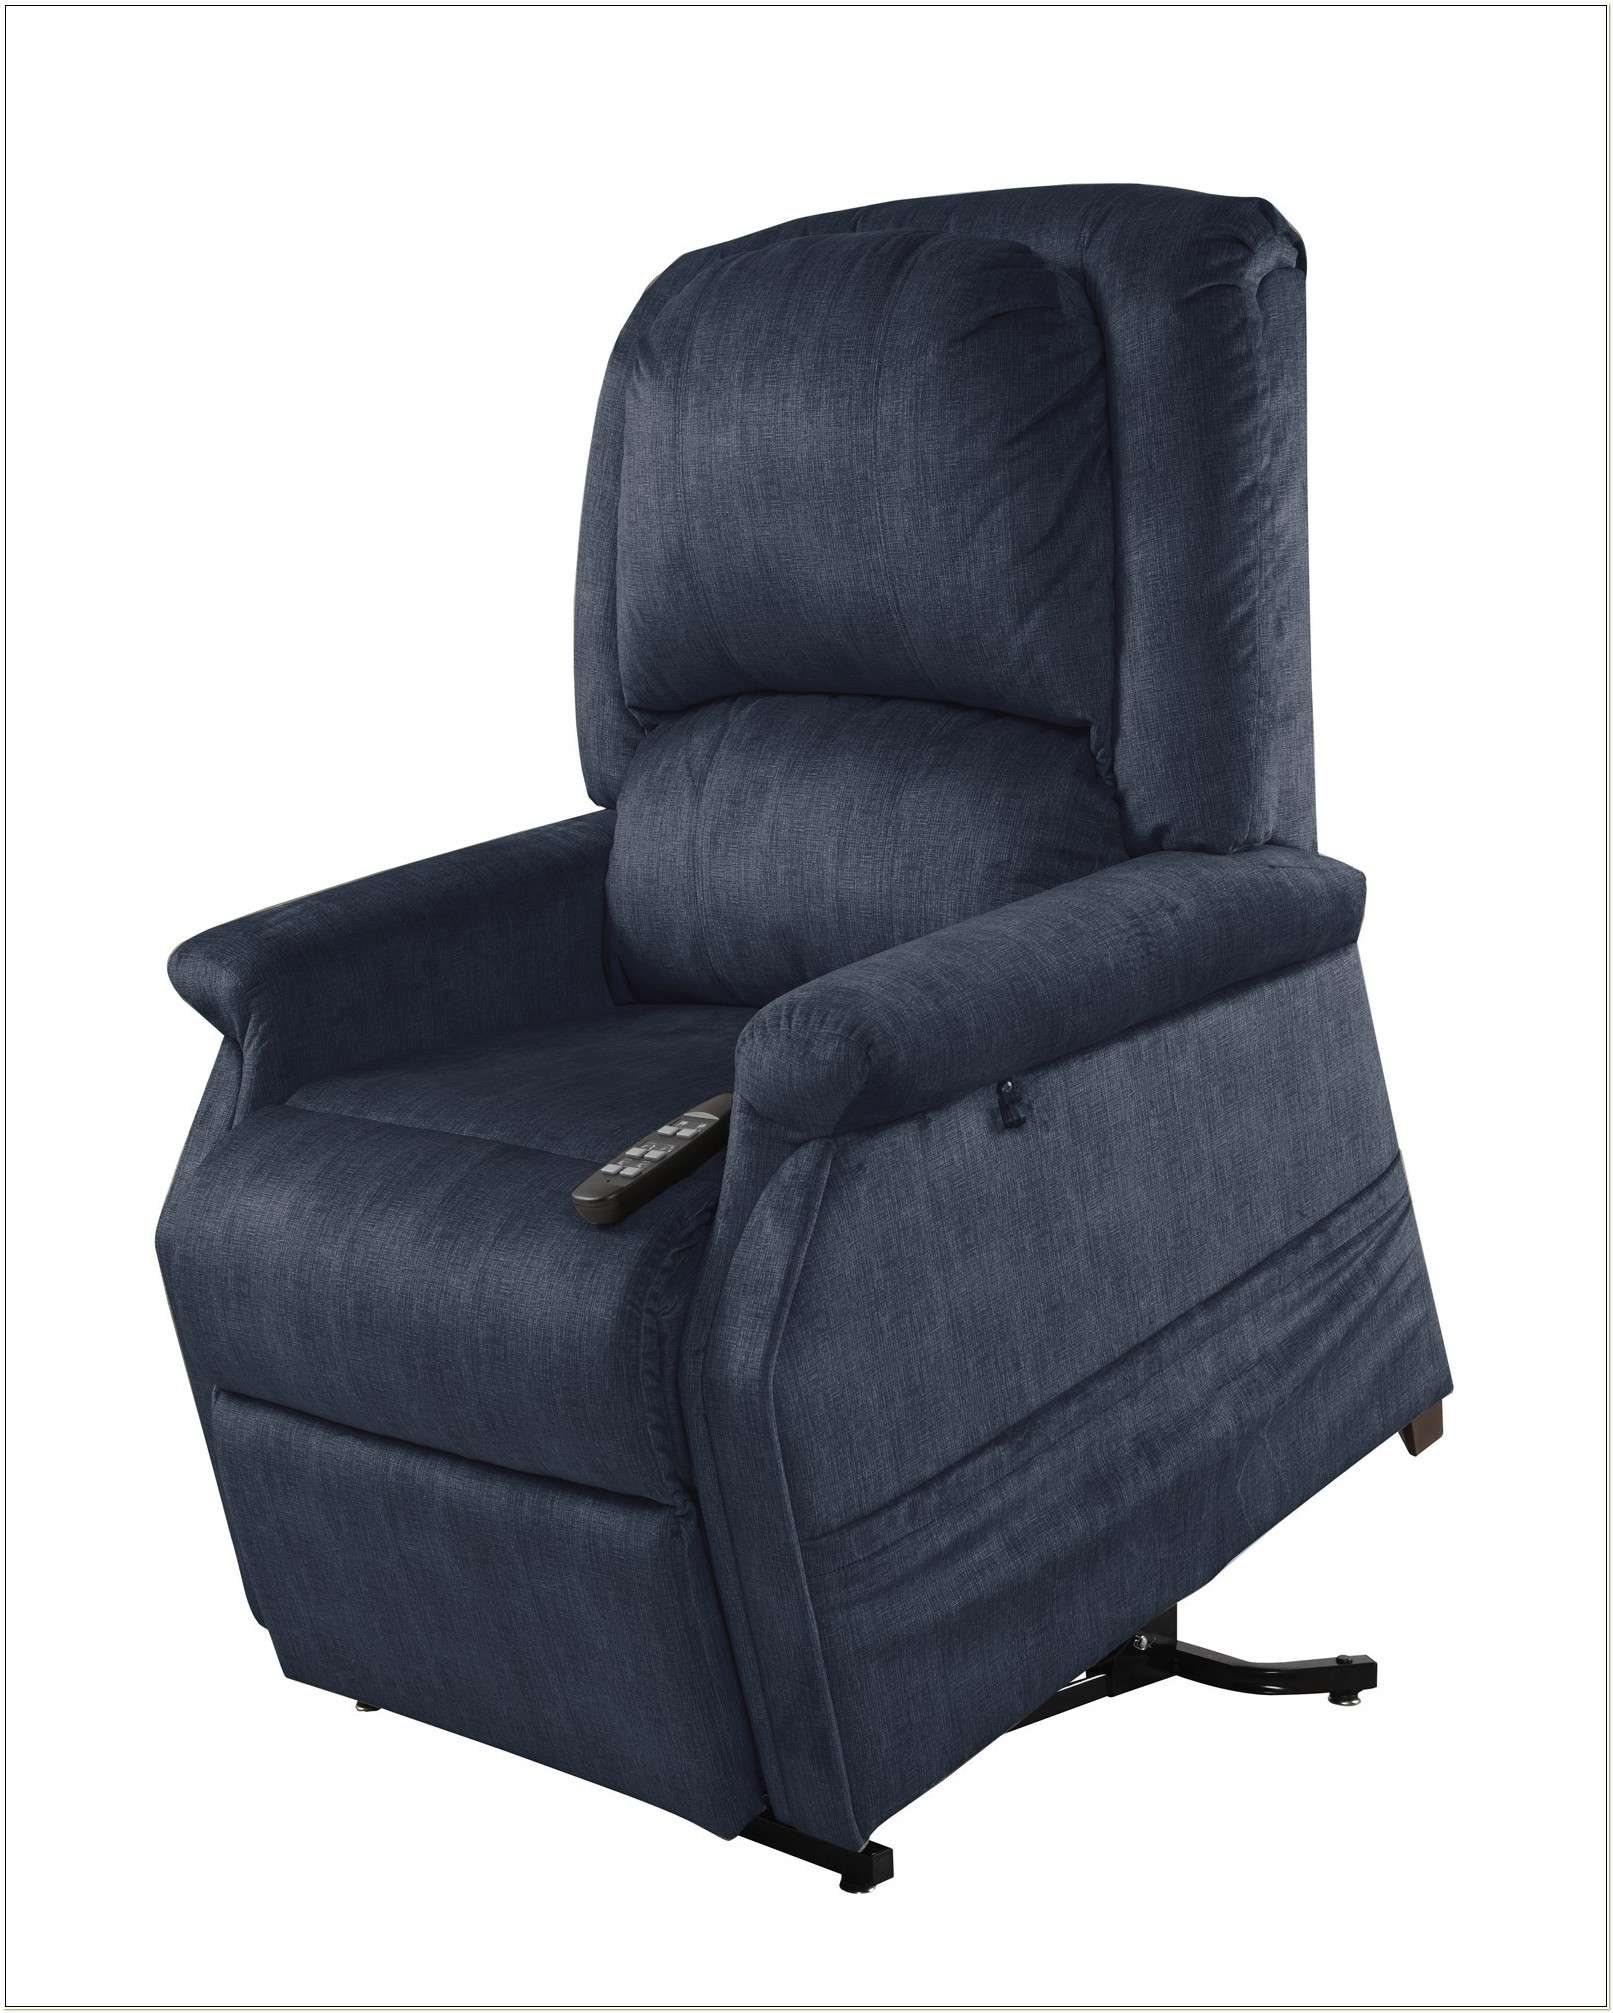 Medicare Approved Lift Chair Dealers ~ designbyafi